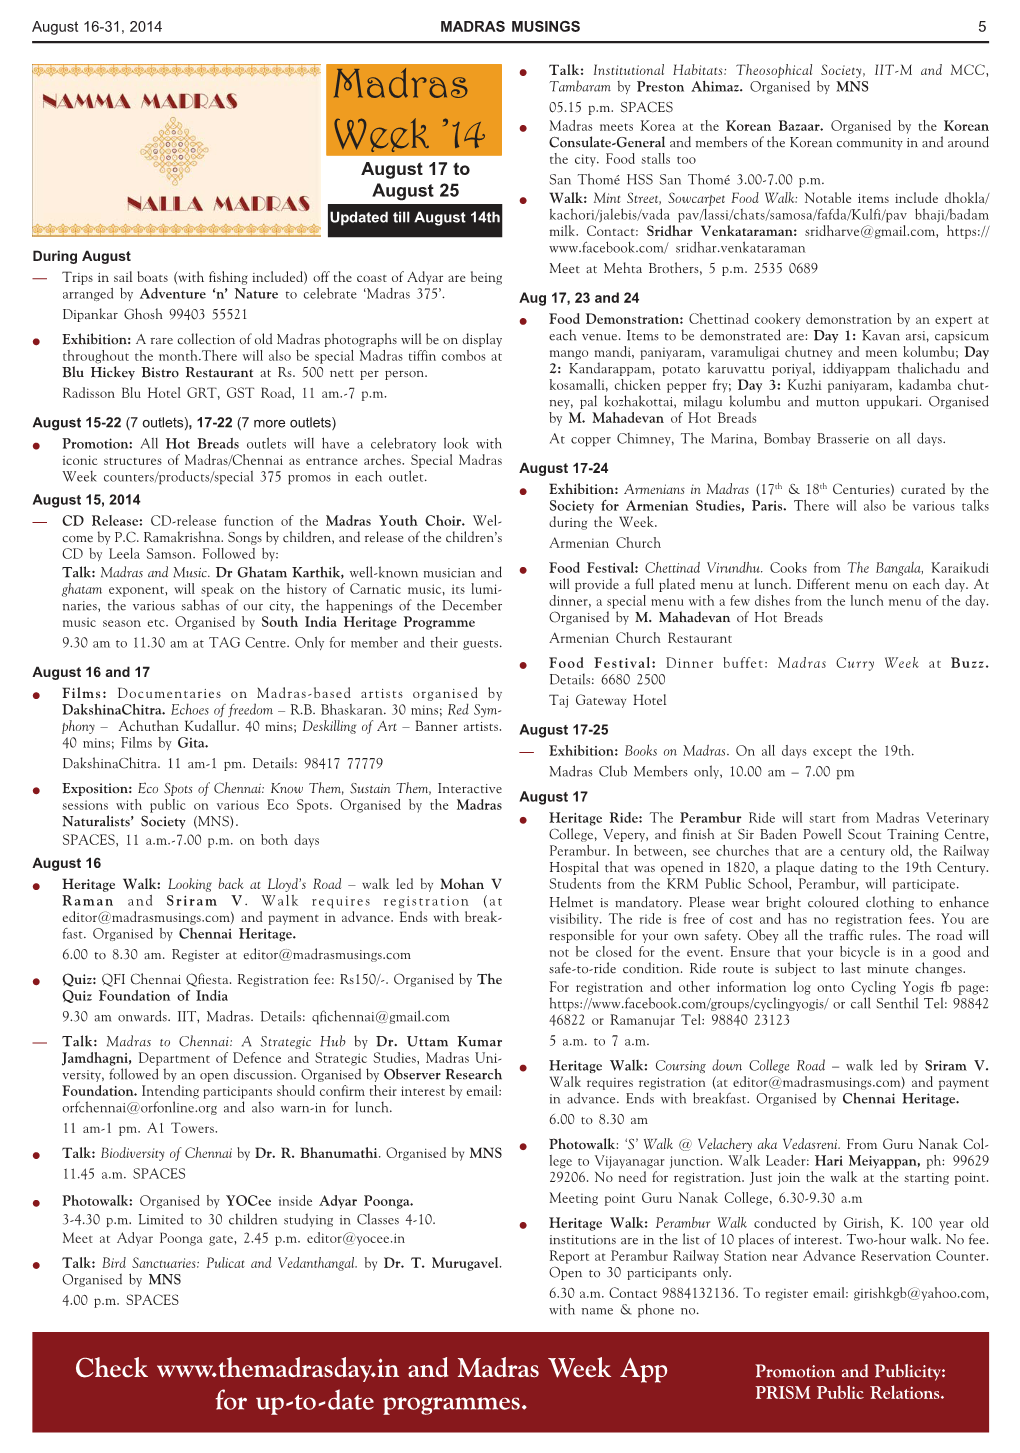 Madras Week Programme List 6 Pages.Pmd